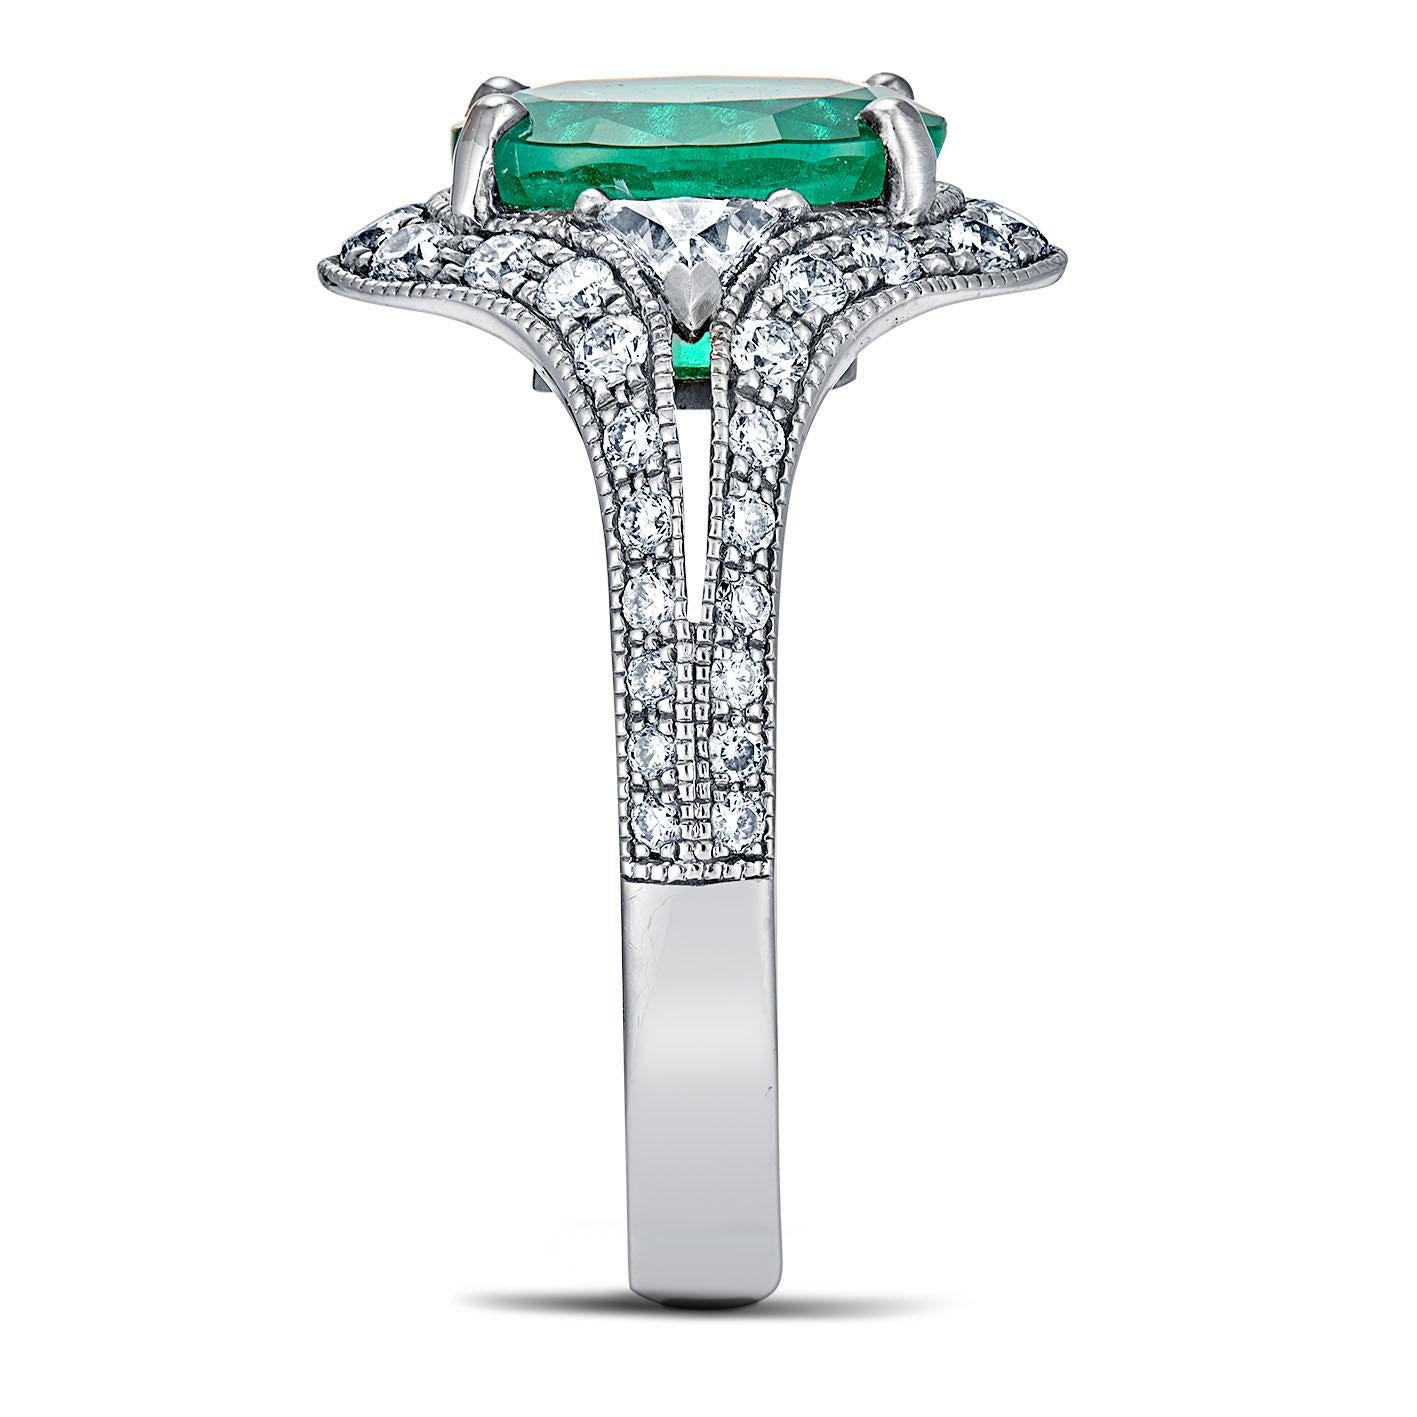 For Sale:  18k White Gold 2.53 Ct Oval Vivid Green Emerald Ring 0.74 Cts of Diamonds 2